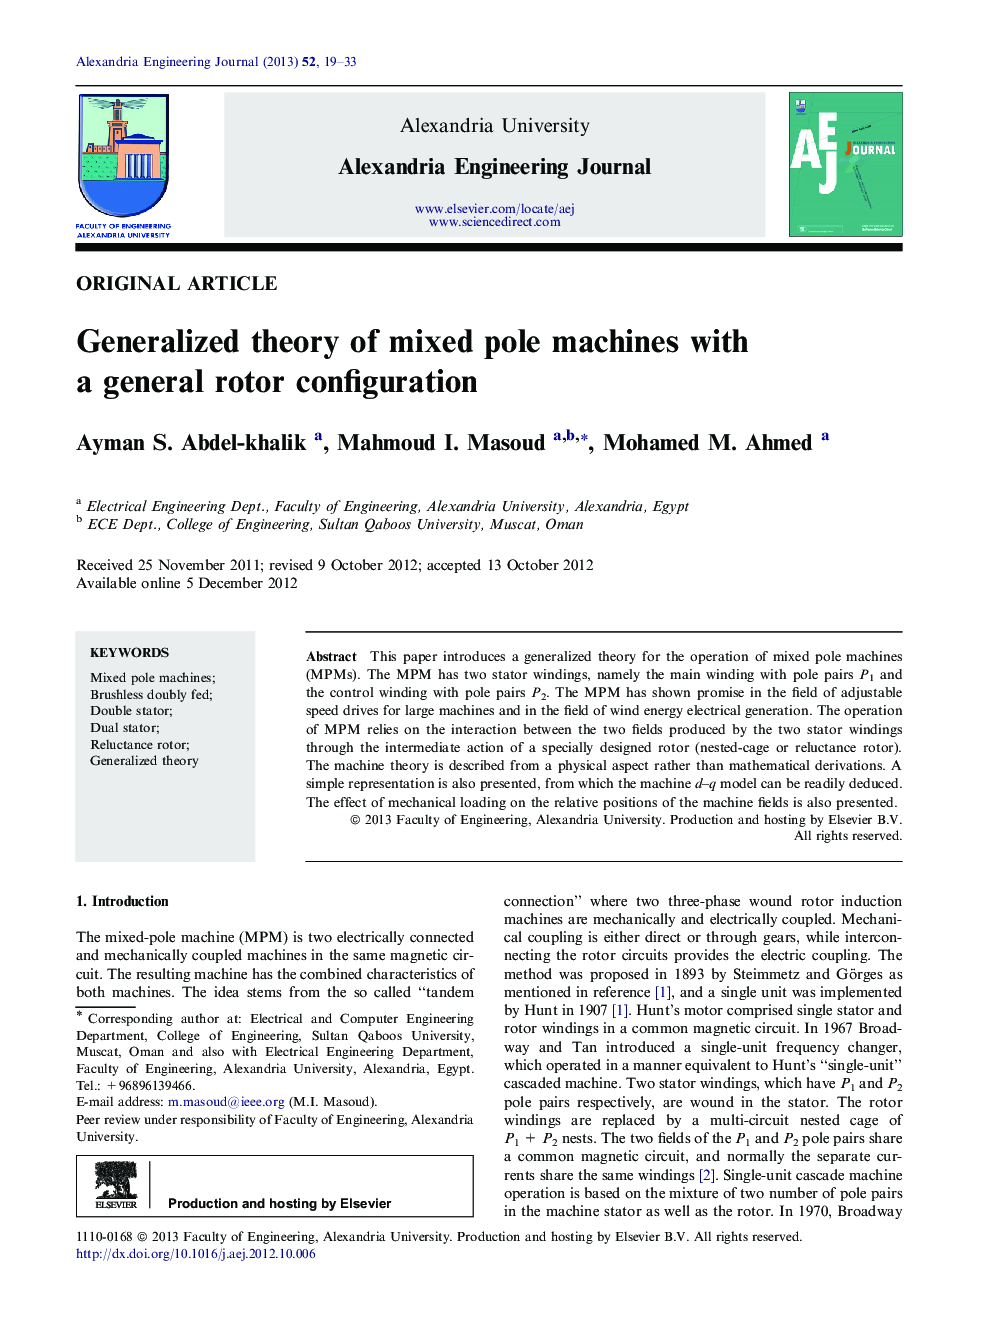 Generalized theory of mixed pole machines with a general rotor configuration 